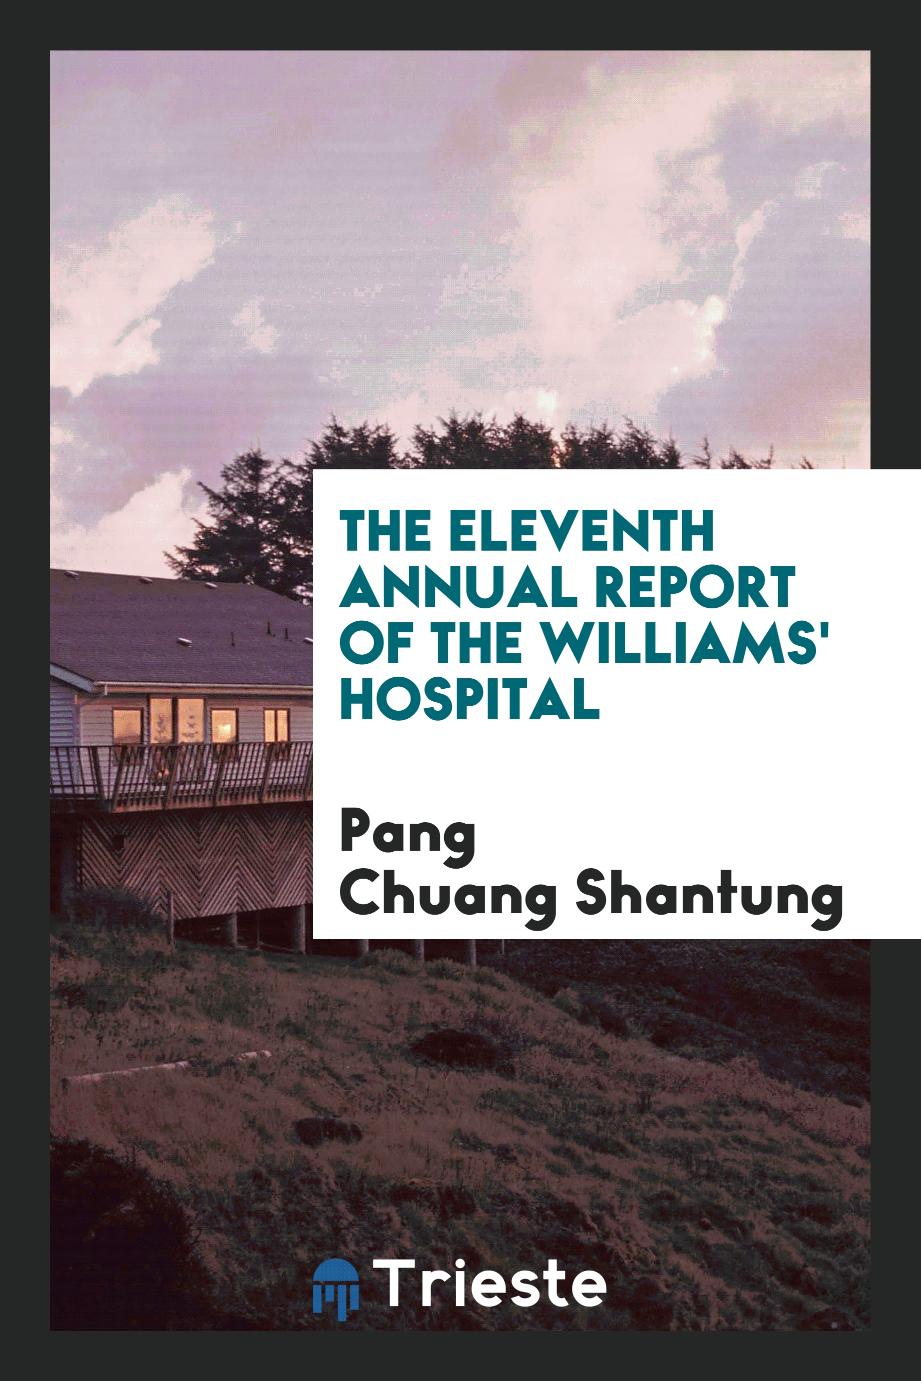 The eleventh Annual Report of the Williams' hospital